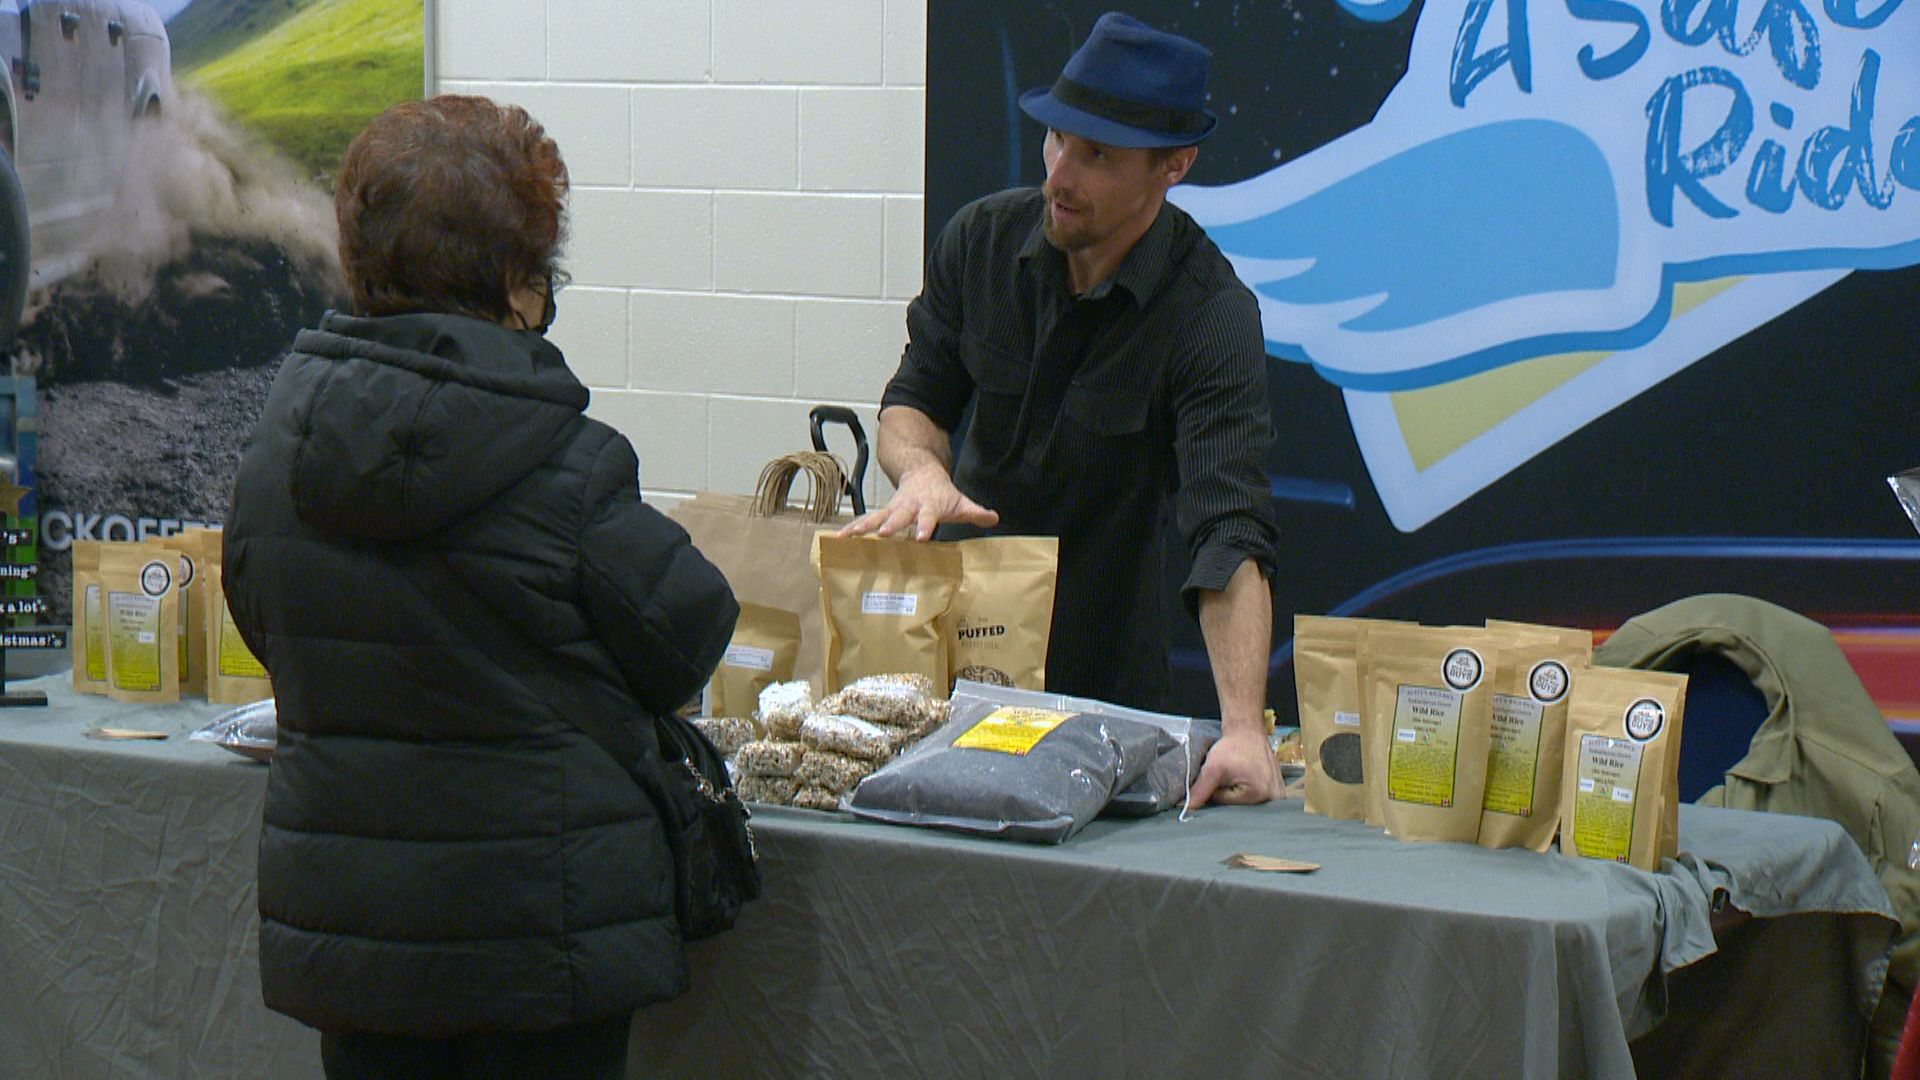 Farmers Holiday Market in Regina biggest since inception